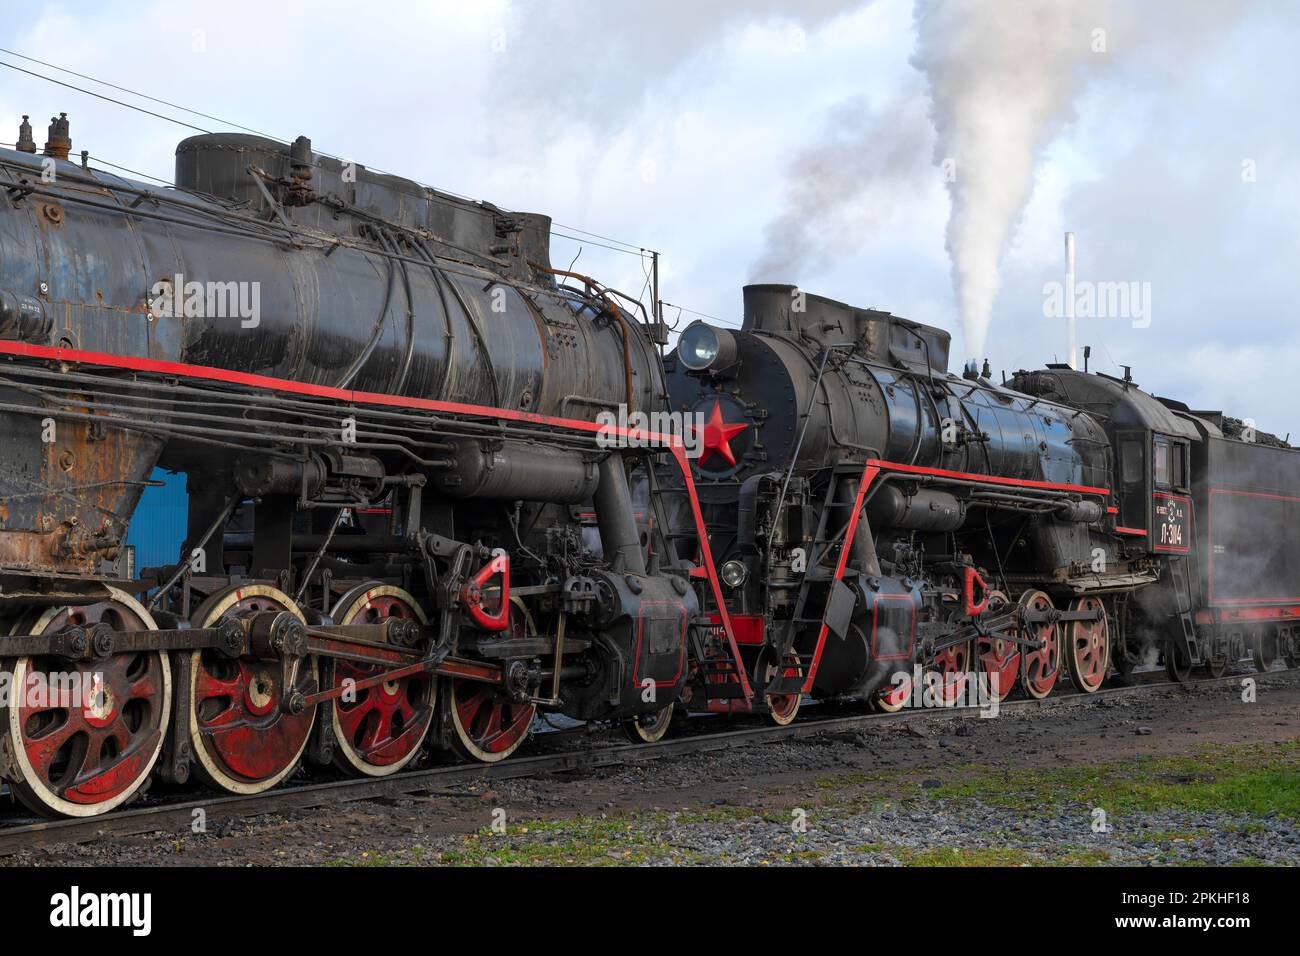 SORTAVALA, RUSSIA - OCTOBER 09, 2022: At the old Soviet steam locomotives on a cloudy October morning. Sortavala railway station Stock Photo